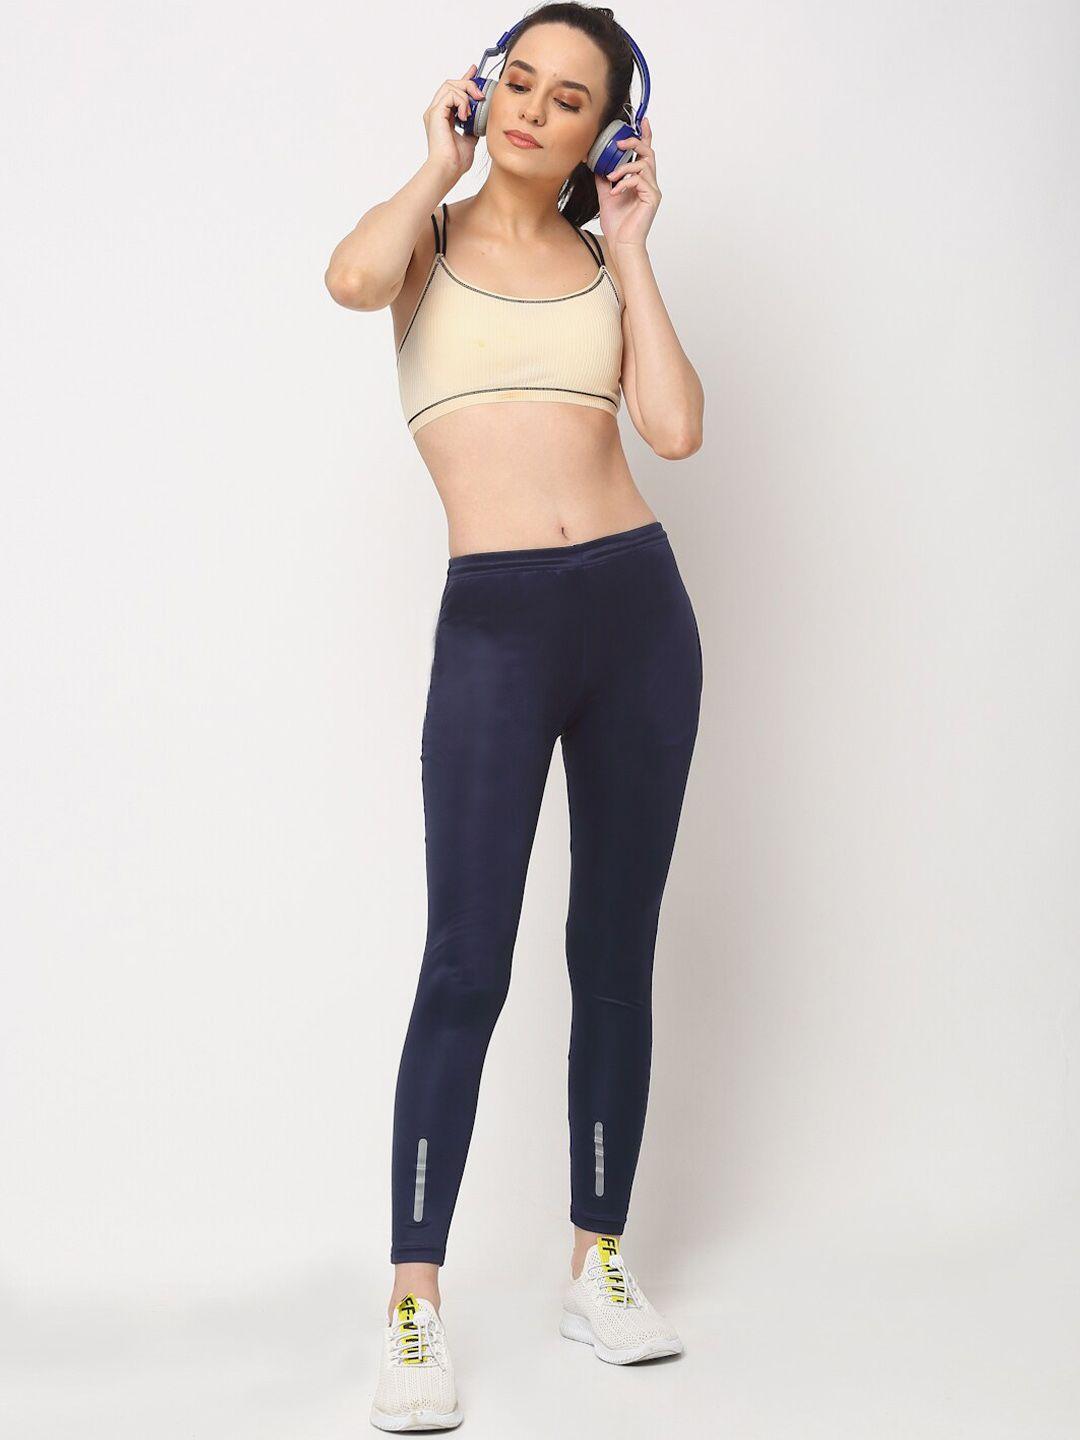 dressberry-women-navy-blue-slim-fit-ankle-length-sports-tights